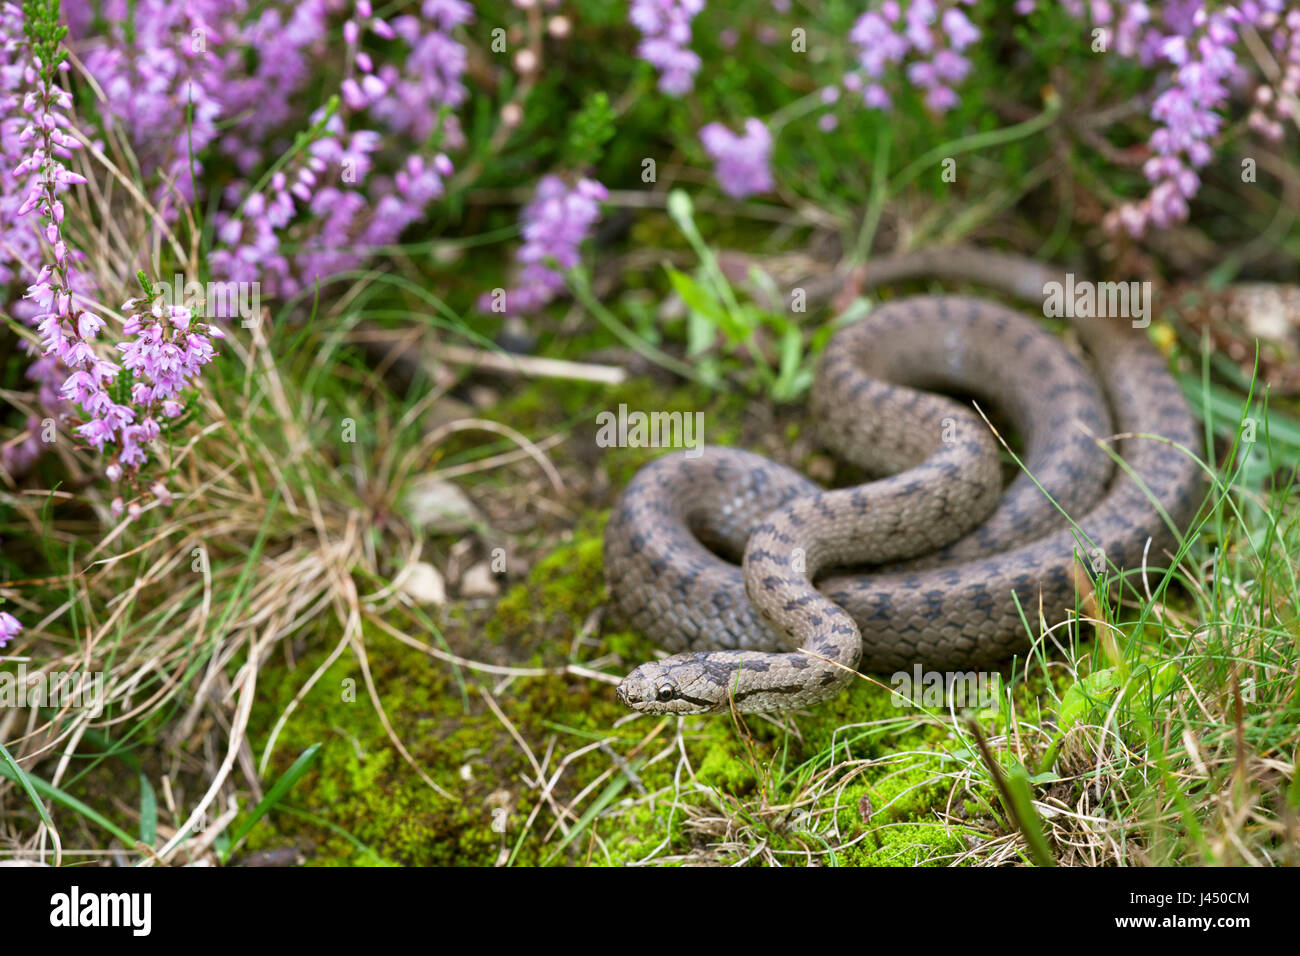 photo of a smooth snake between flowering heather Stock Photo